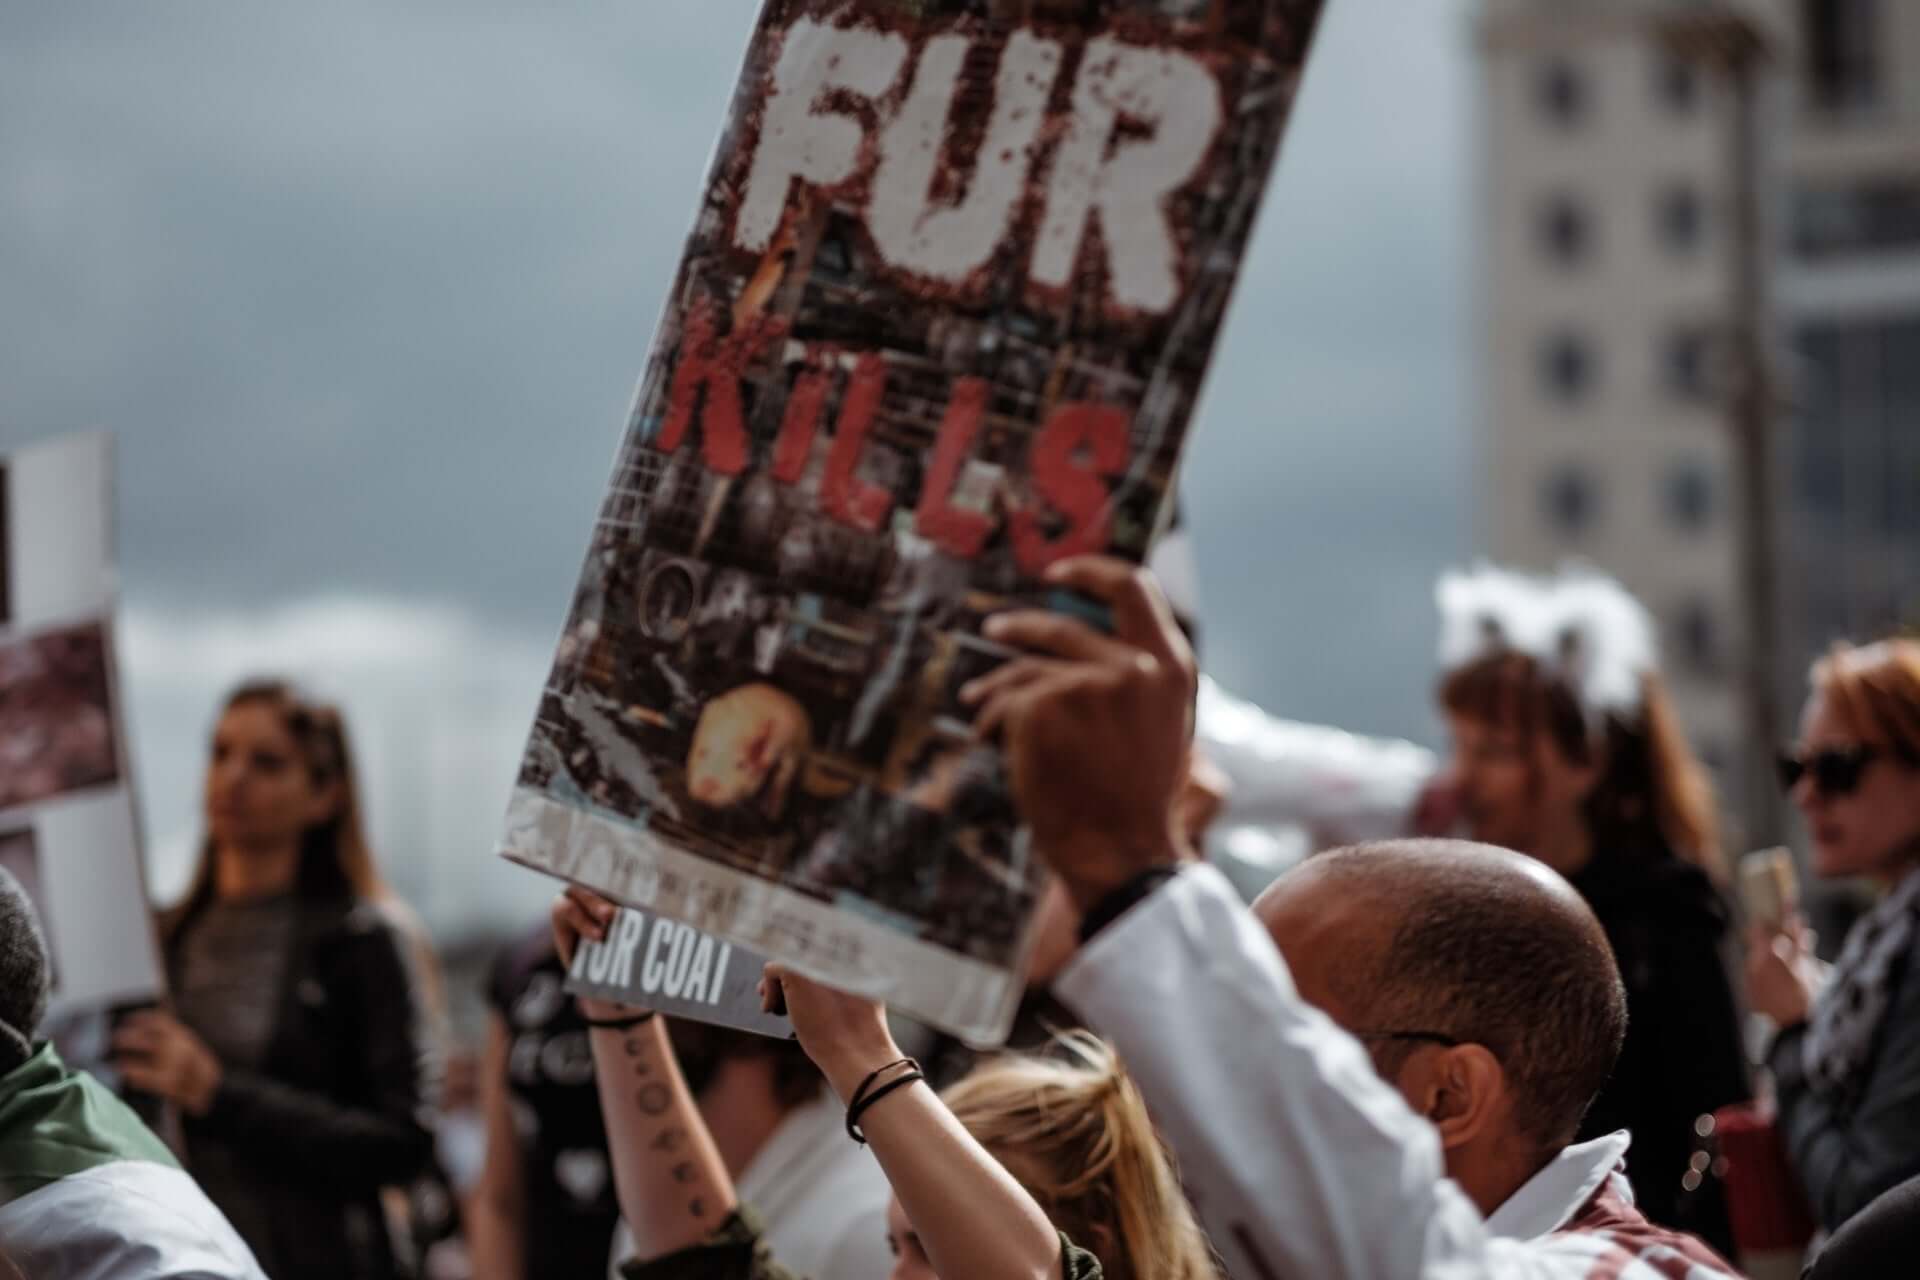 Protesters hold a sign that says "Fur kills."